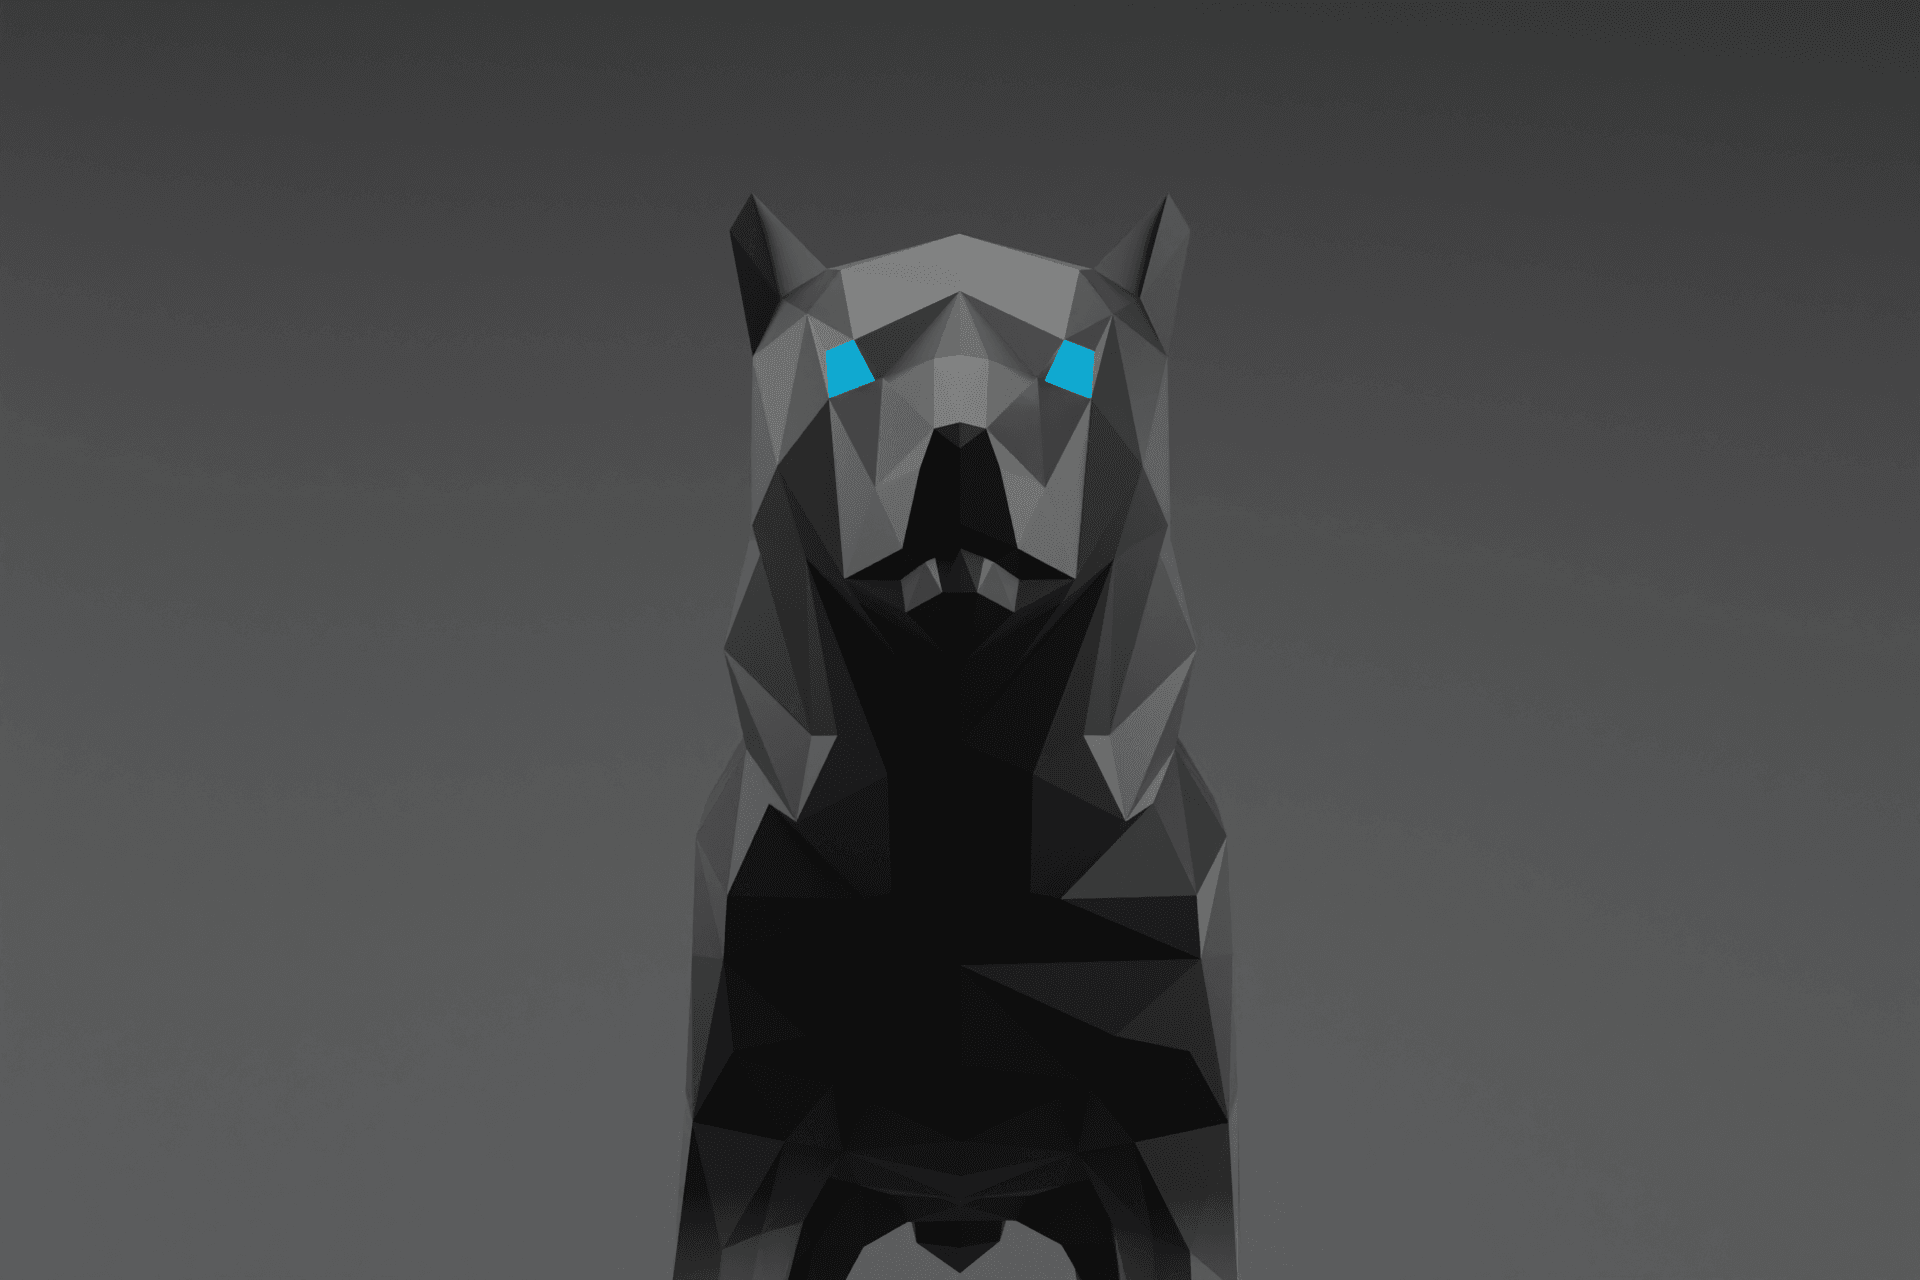 Low Poly Wolf STL available now!